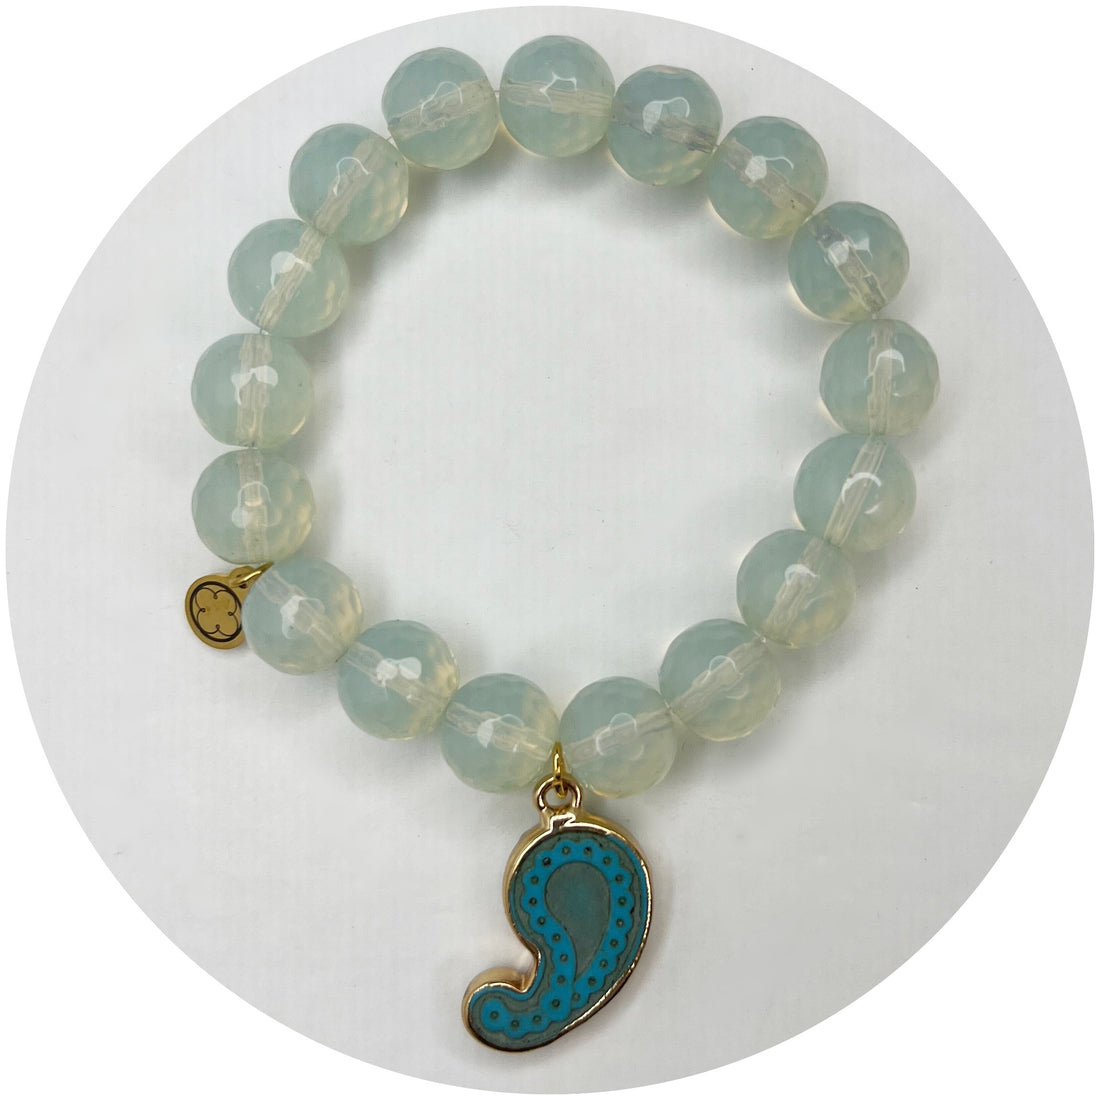 Opalite with Antique Turquoise Paisley